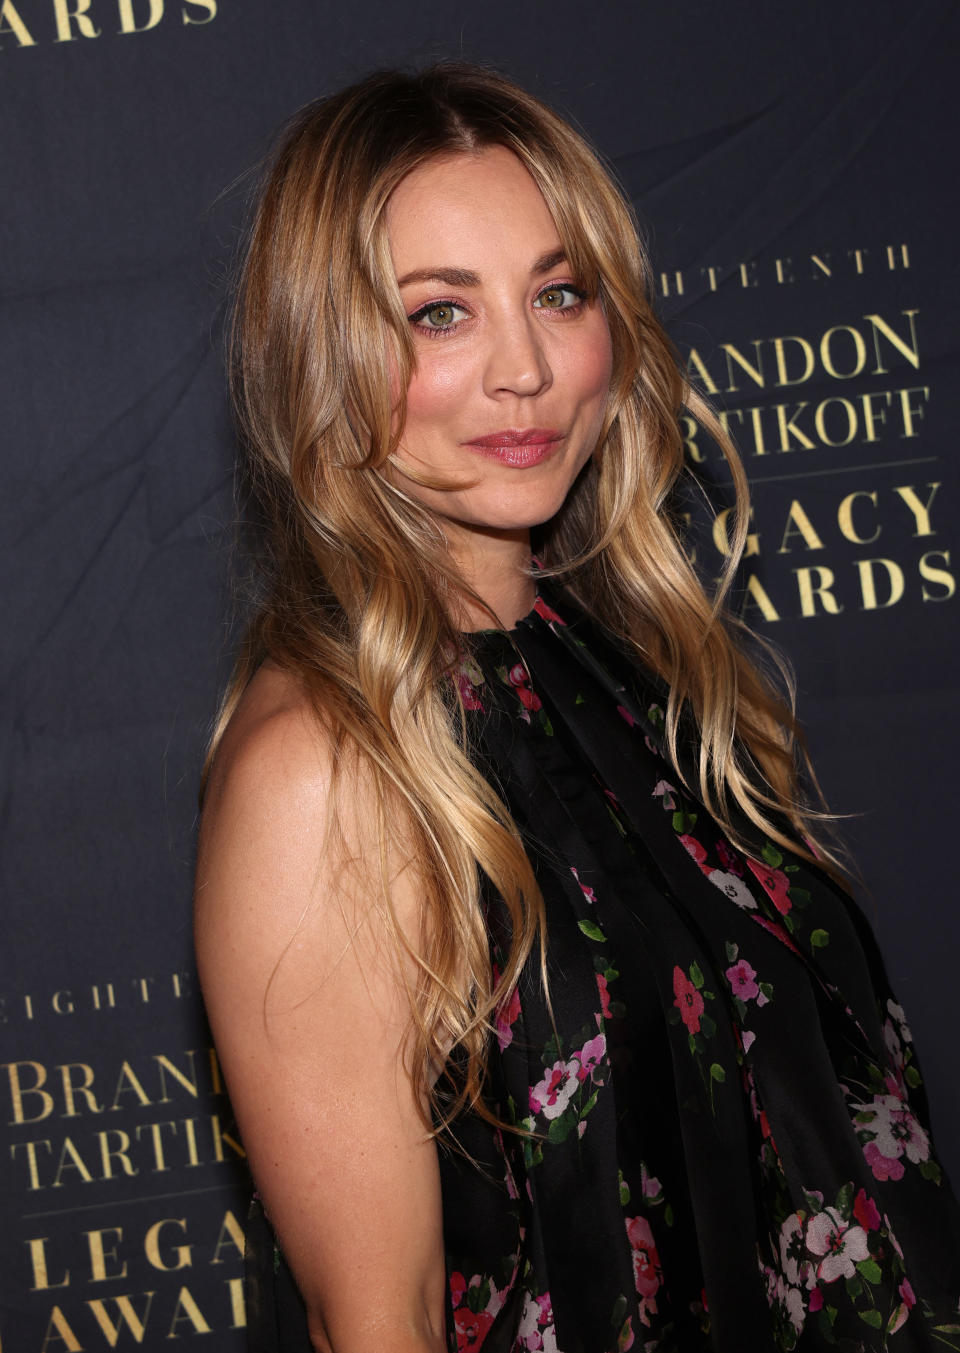 BEVERLY HILLS, CALIFORNIA - JUNE 02:  Kaley Cuoco attends the 18th Annual Brandon Tartikoff Legacy Awards at the Beverly Wilshire, A Four Seasons Hotel on June 02, 2022 in Beverly Hills, California. (Photo by David Livingston/Getty Images)